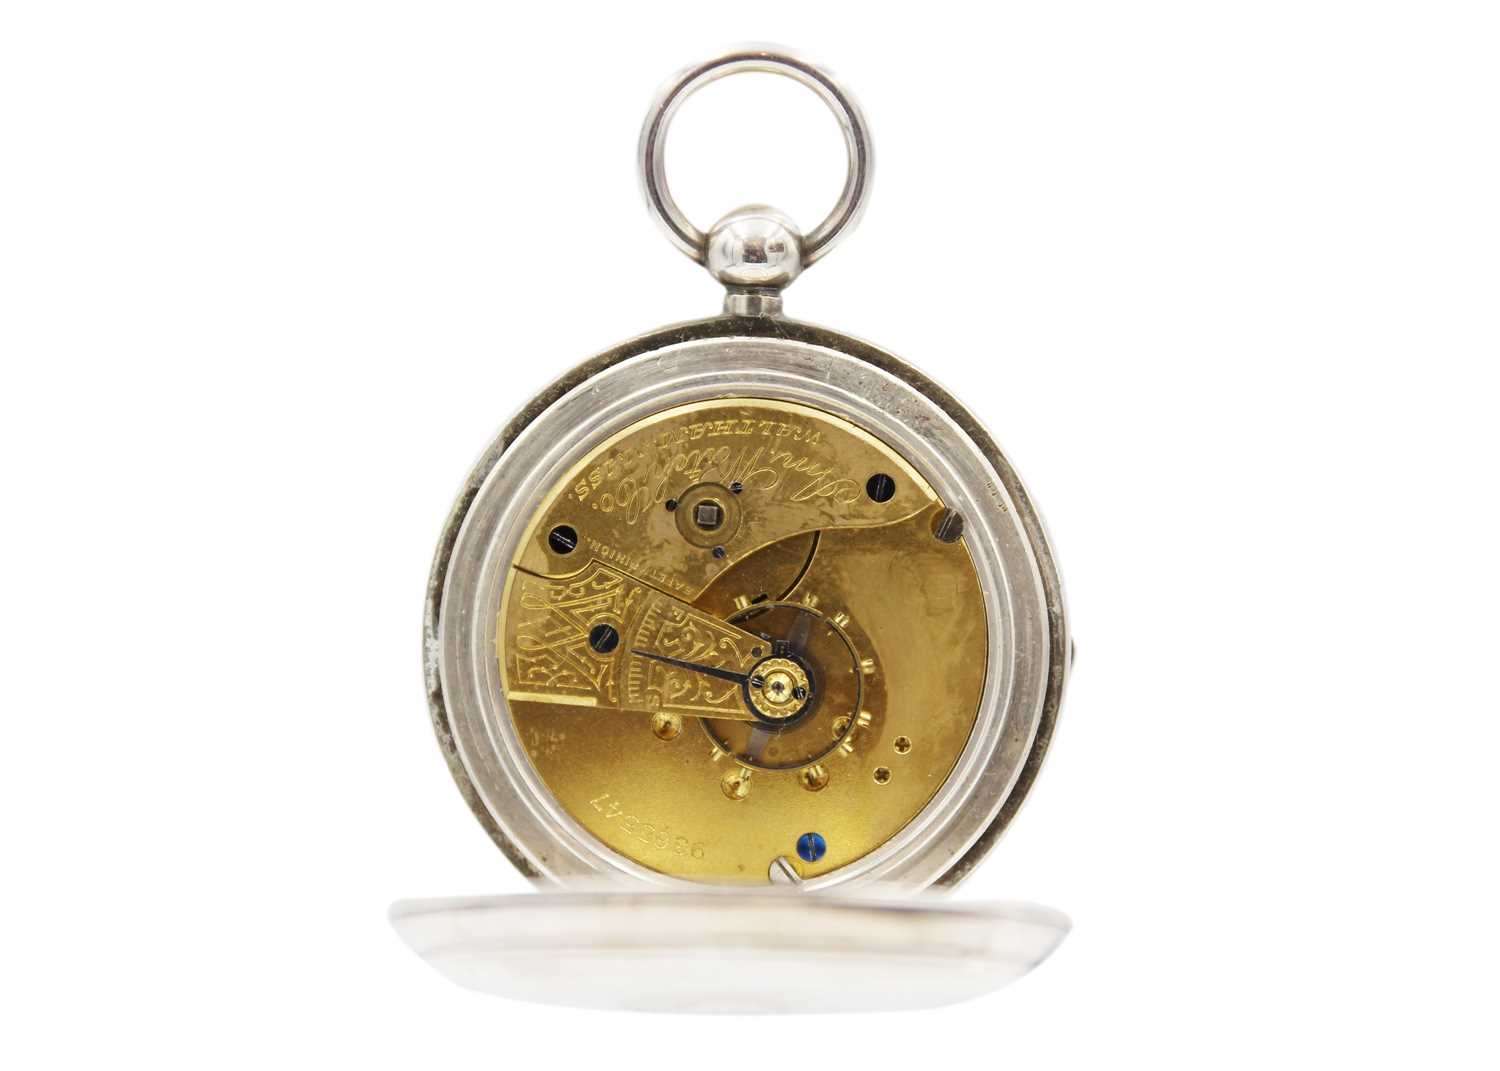 Two American Watch Co. Waltham silver-cased key wind pocket watches. - Image 6 of 7